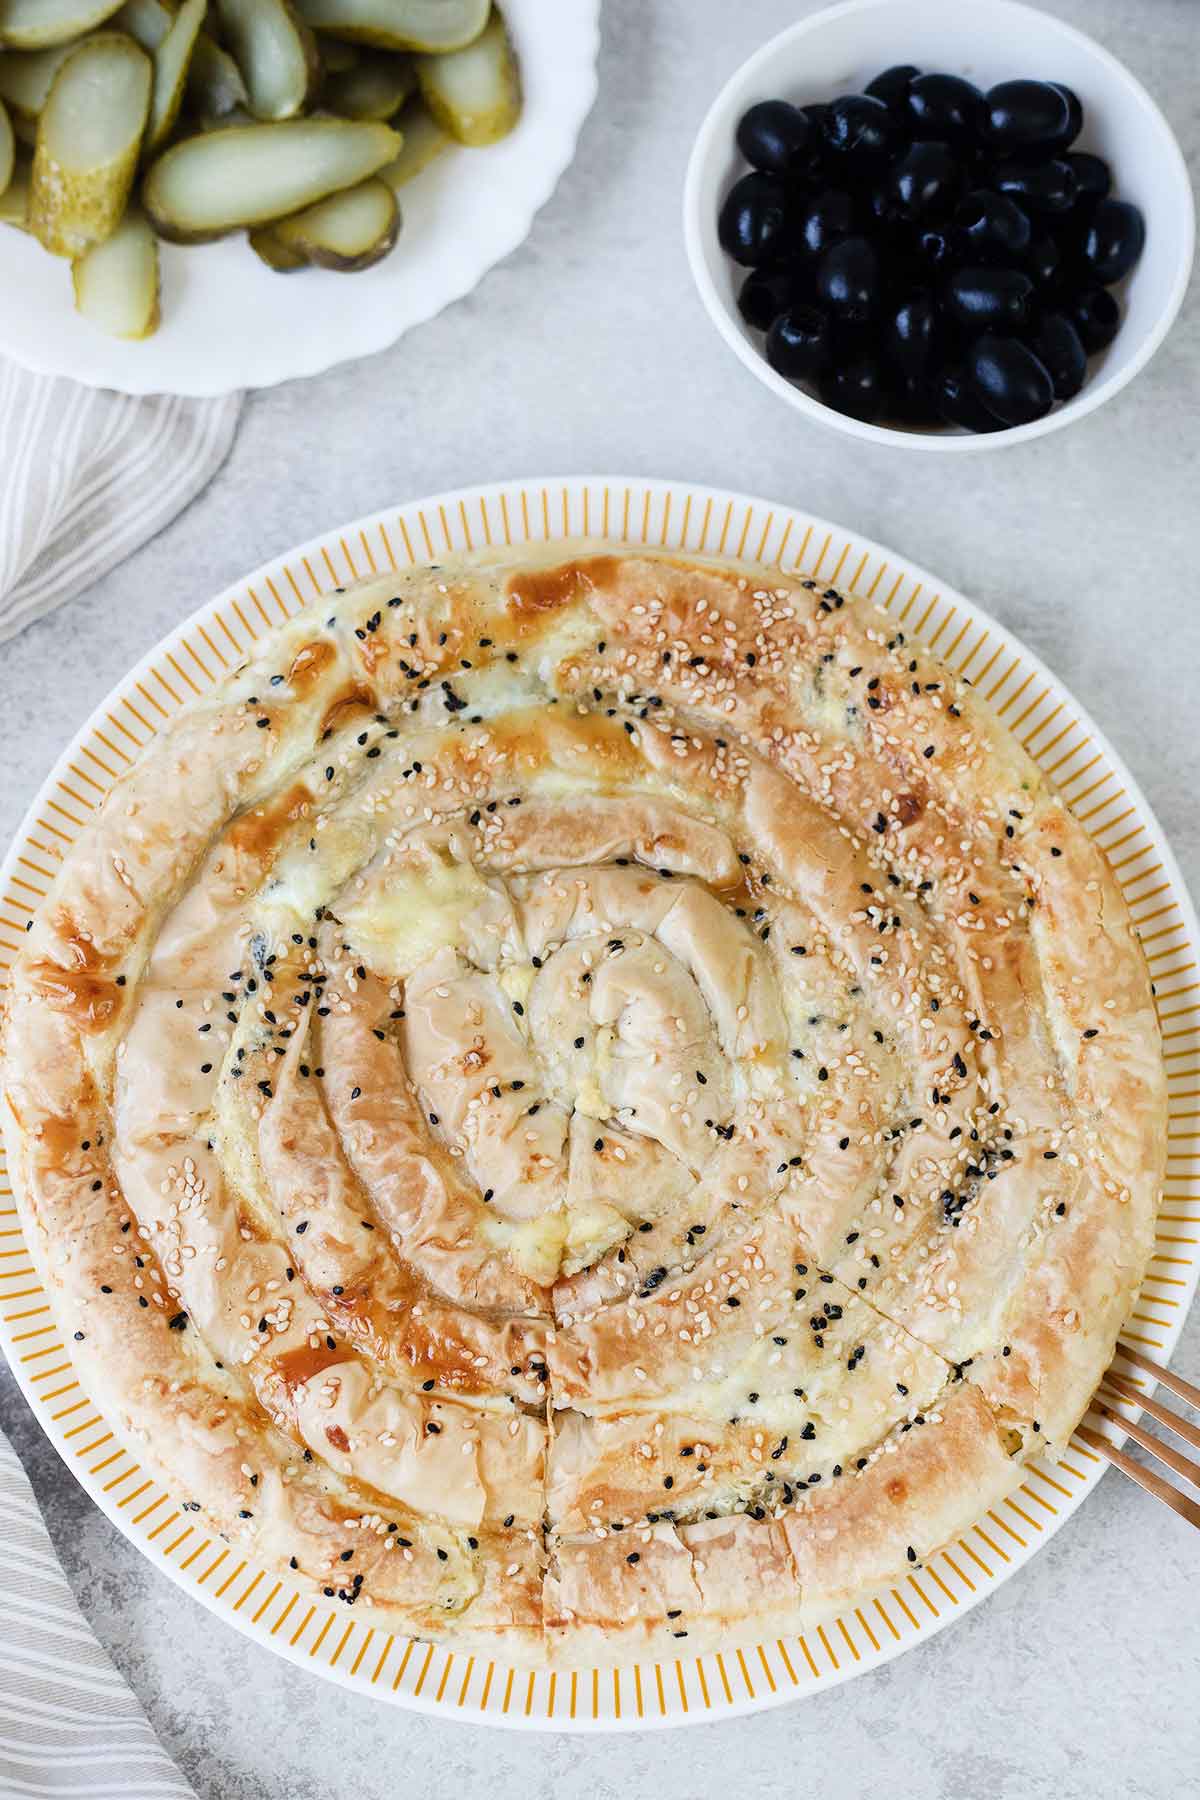 A whole Greek cheese pie (tiropita) in a serving plate topped with black seeds and sesame seeds.